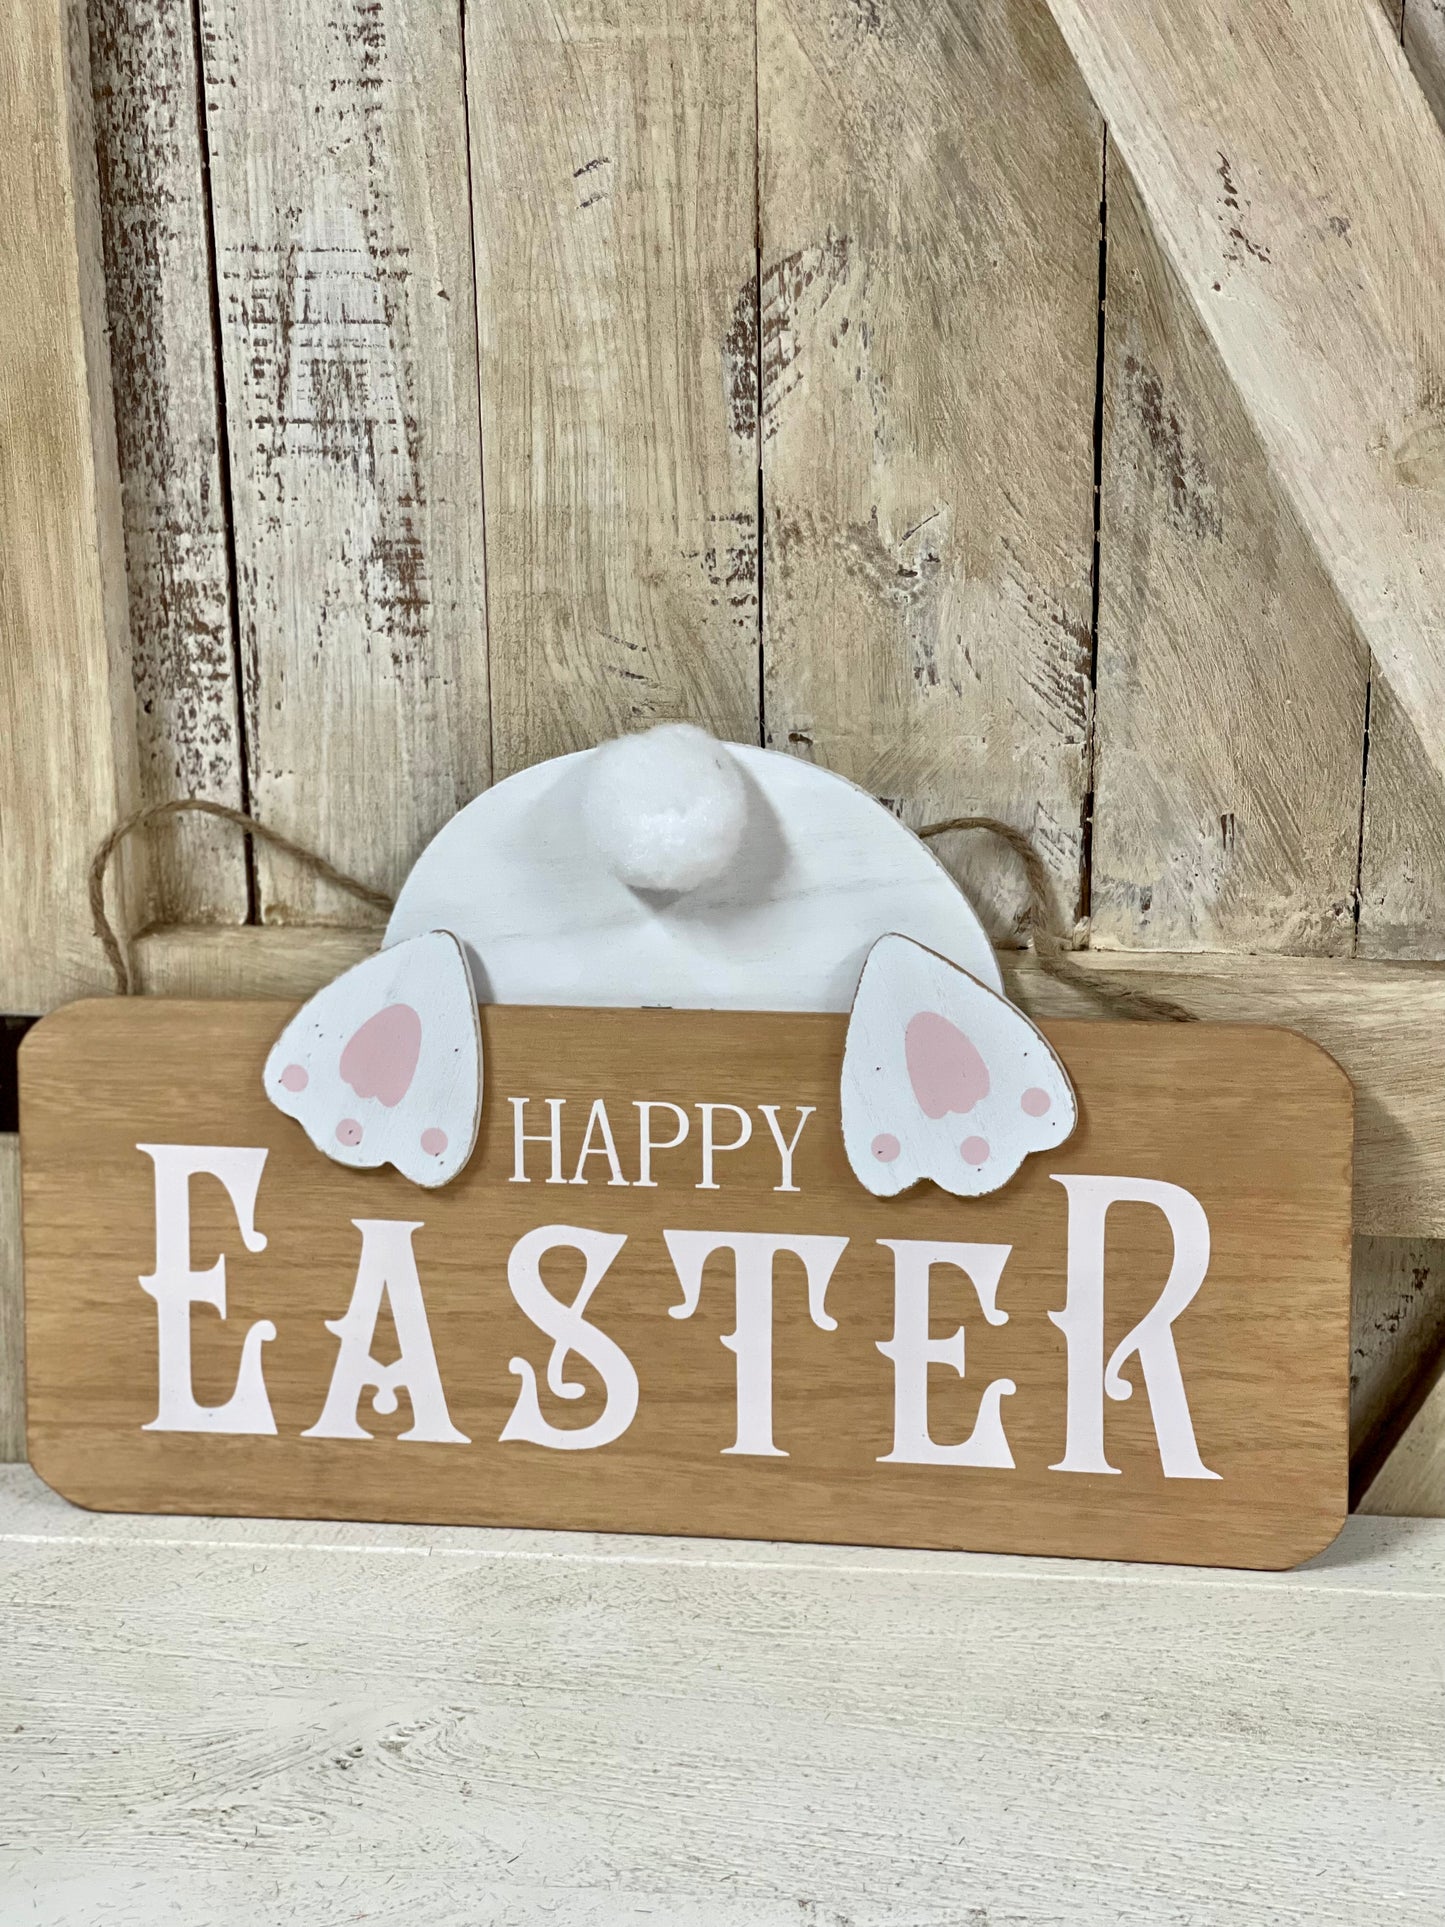 10 Inch Happy Easter Hanging Wood Plaque